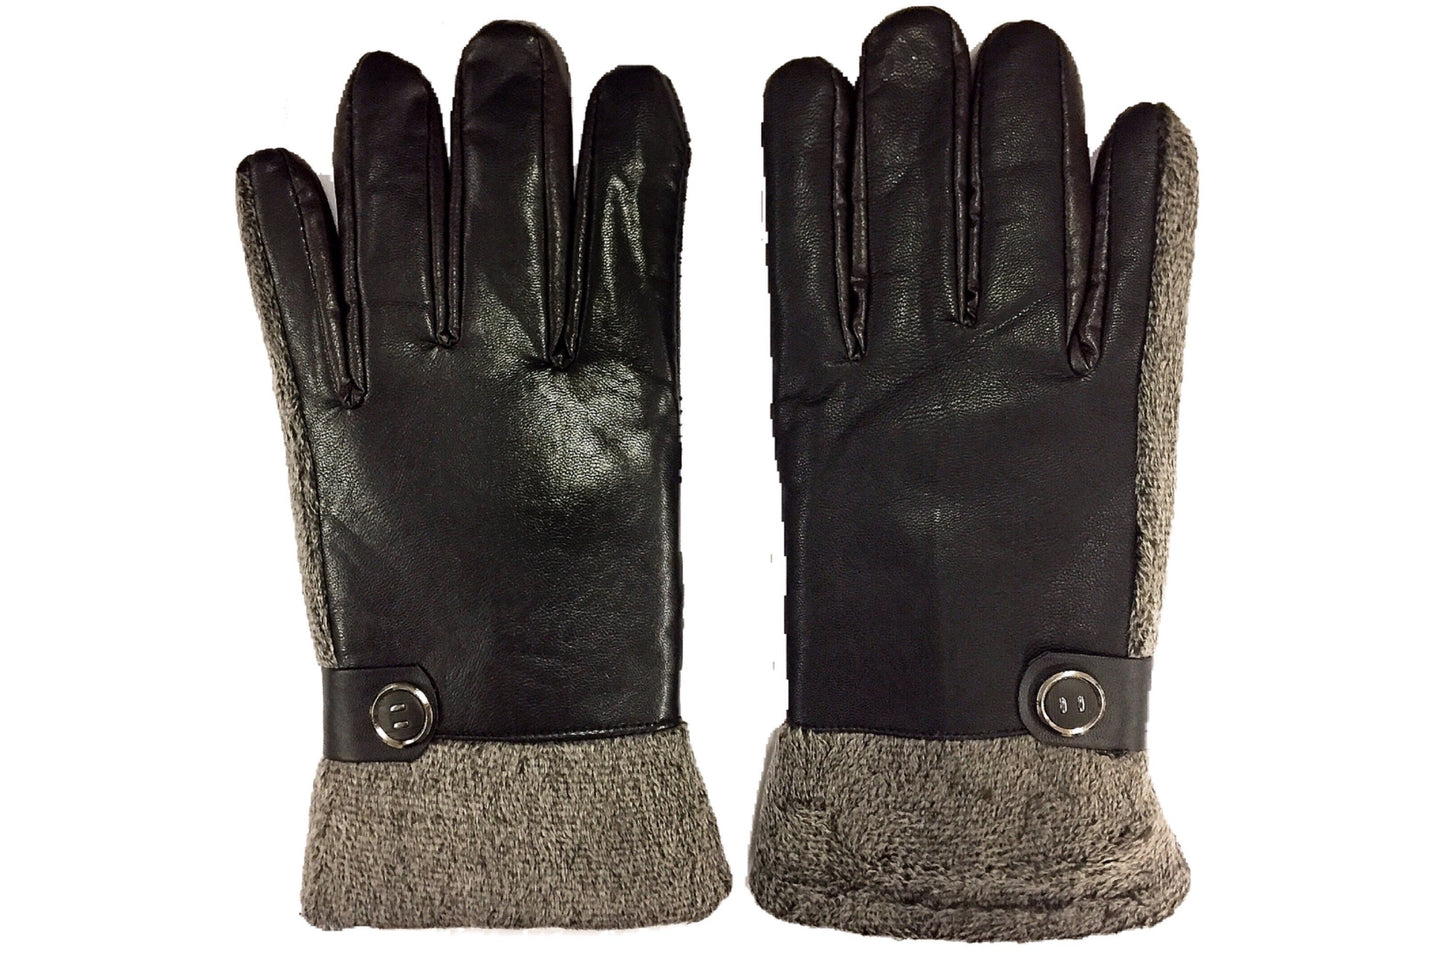 Fleece Lined Leather Gloves with Rubber Grip